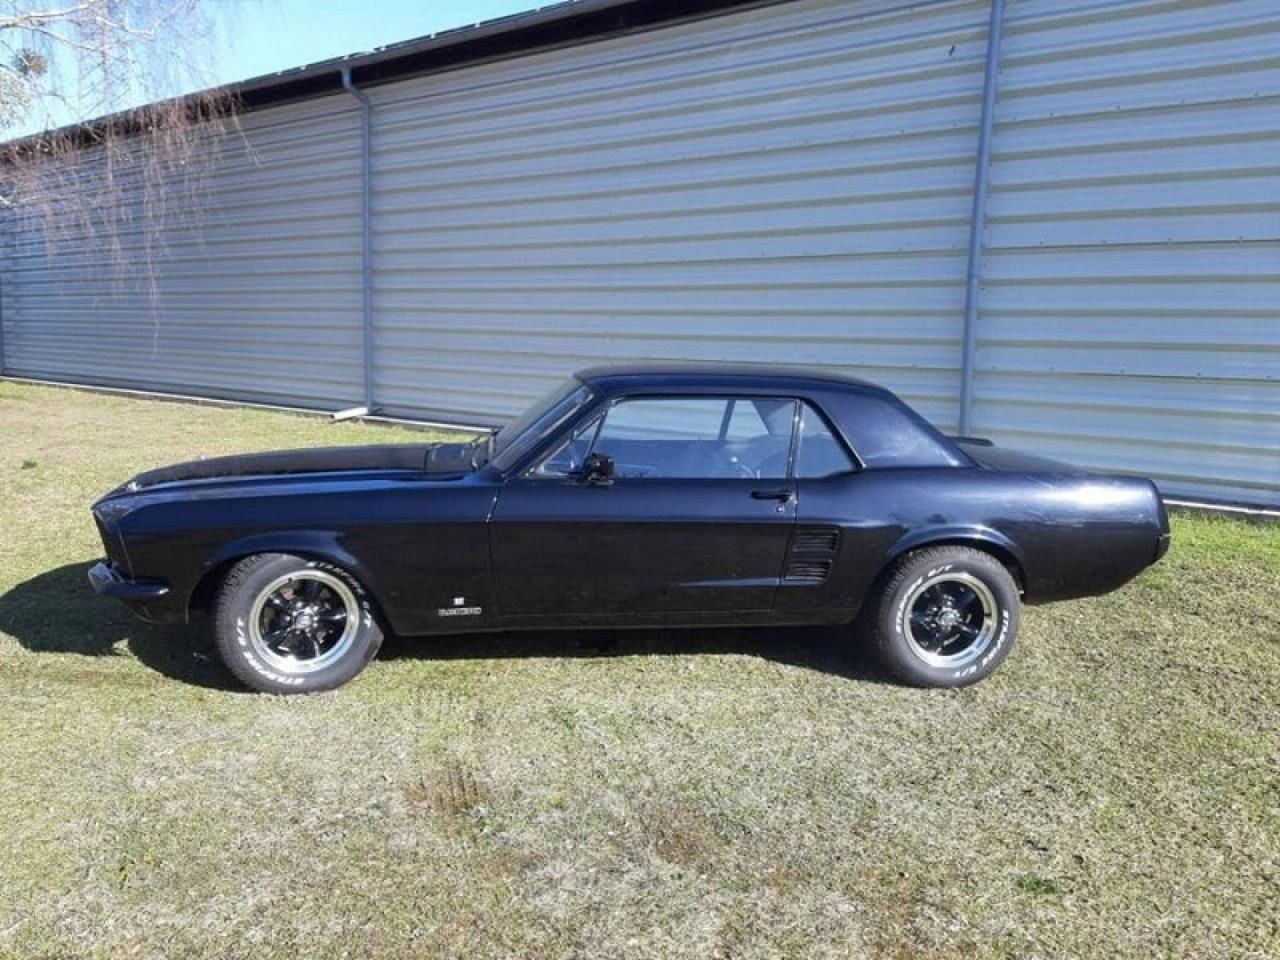 Ford Mustang 1967 Black Edition doinwestowany Opinie i